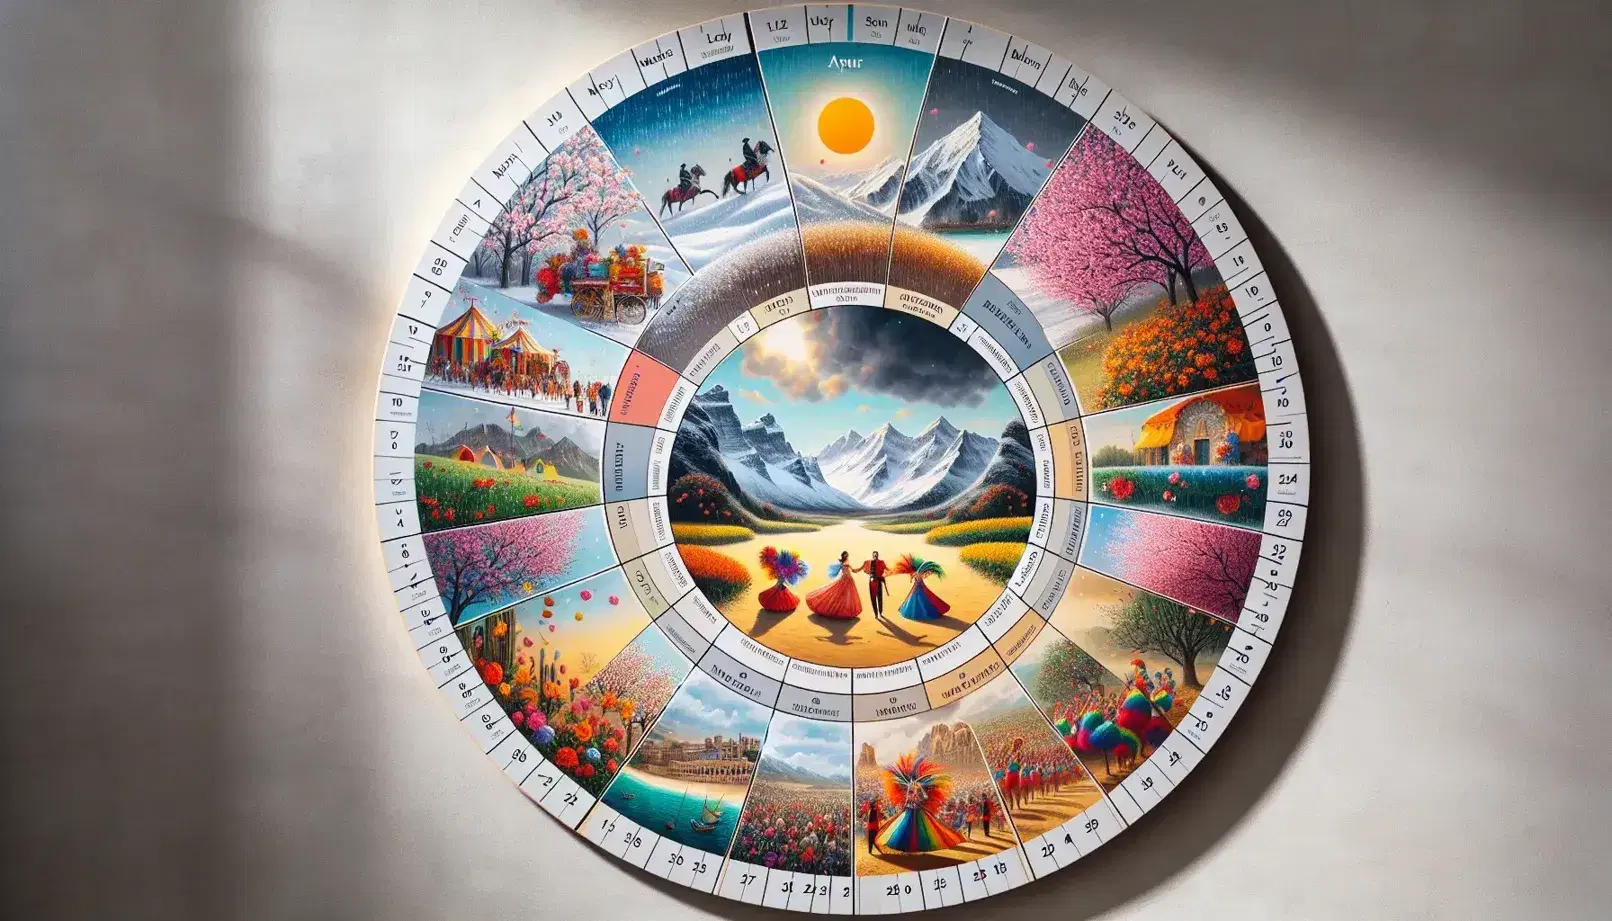 Circular wall calendar showcasing vibrant illustrations for each month, reflecting seasonal and cultural themes from the Spanish-speaking world.